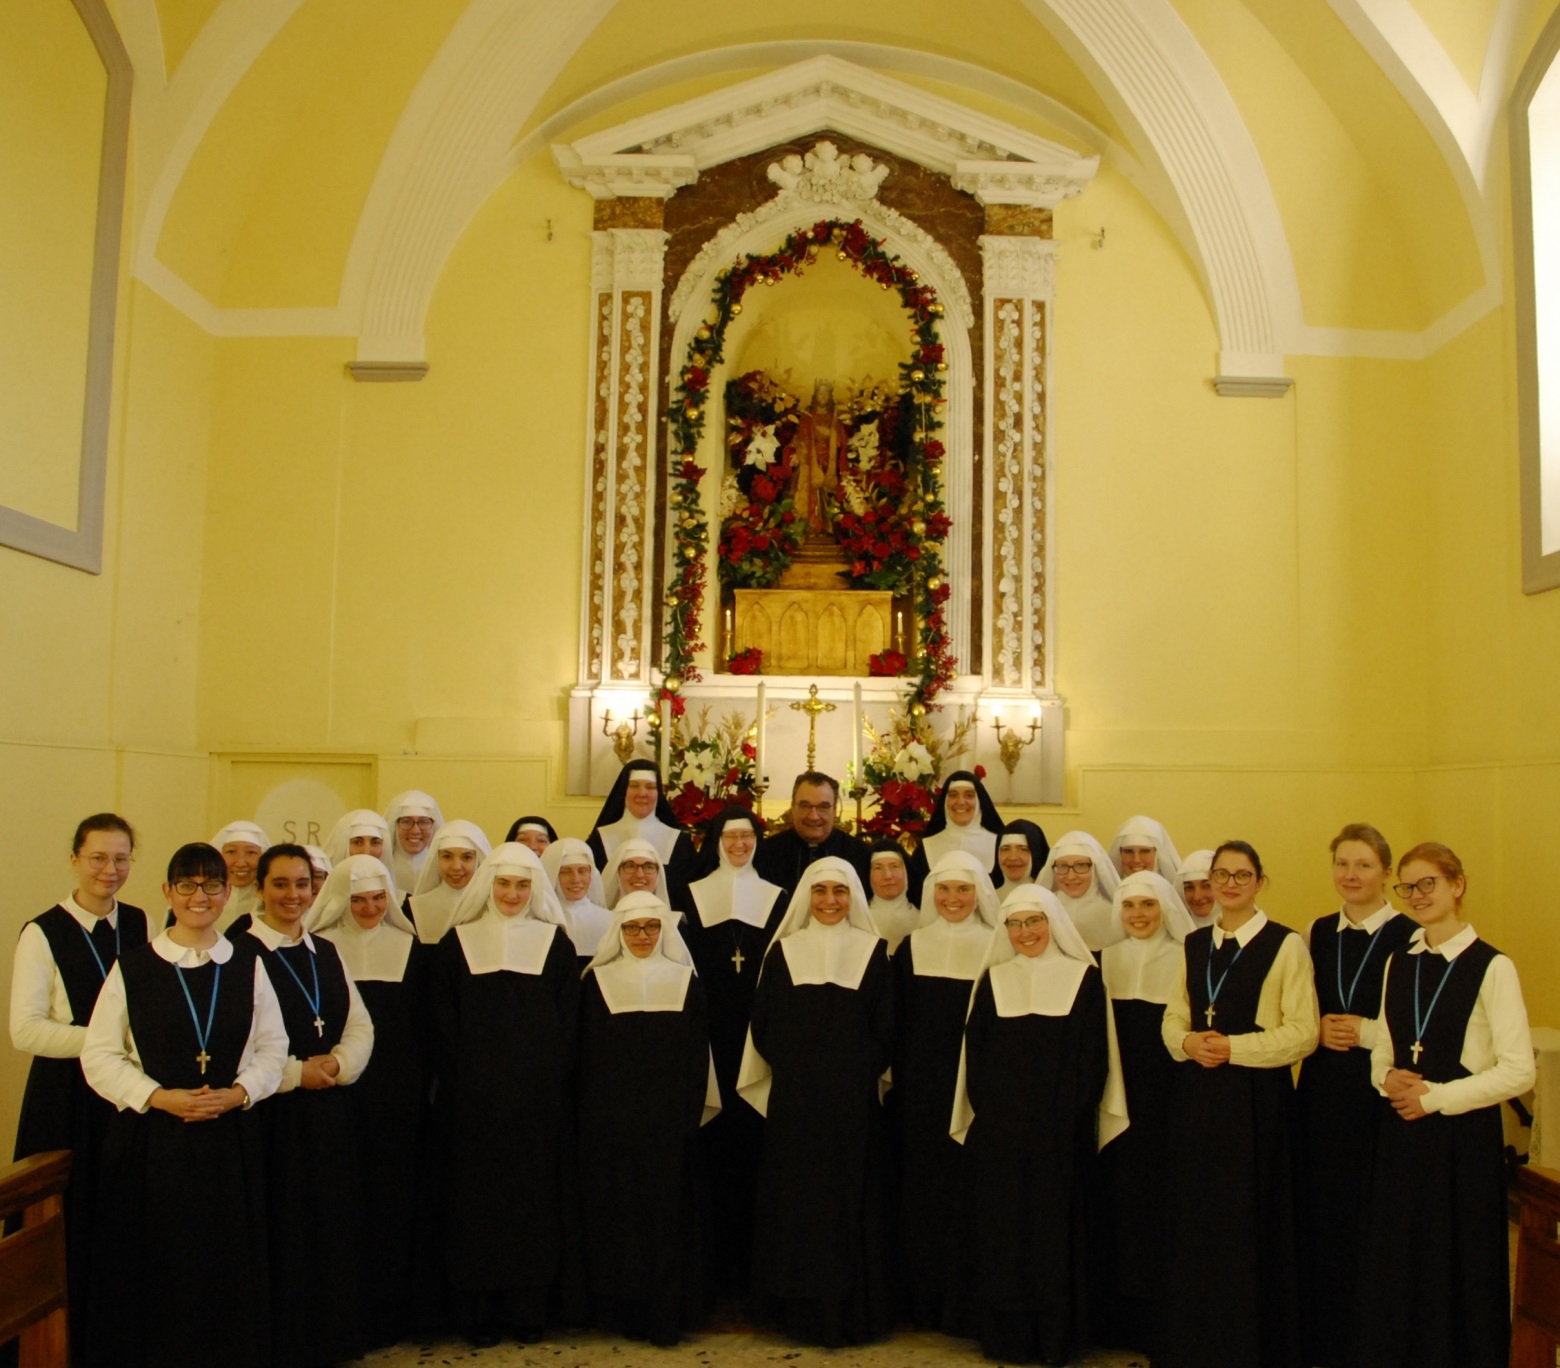 From the Sister Adorers: News from the Novitiate